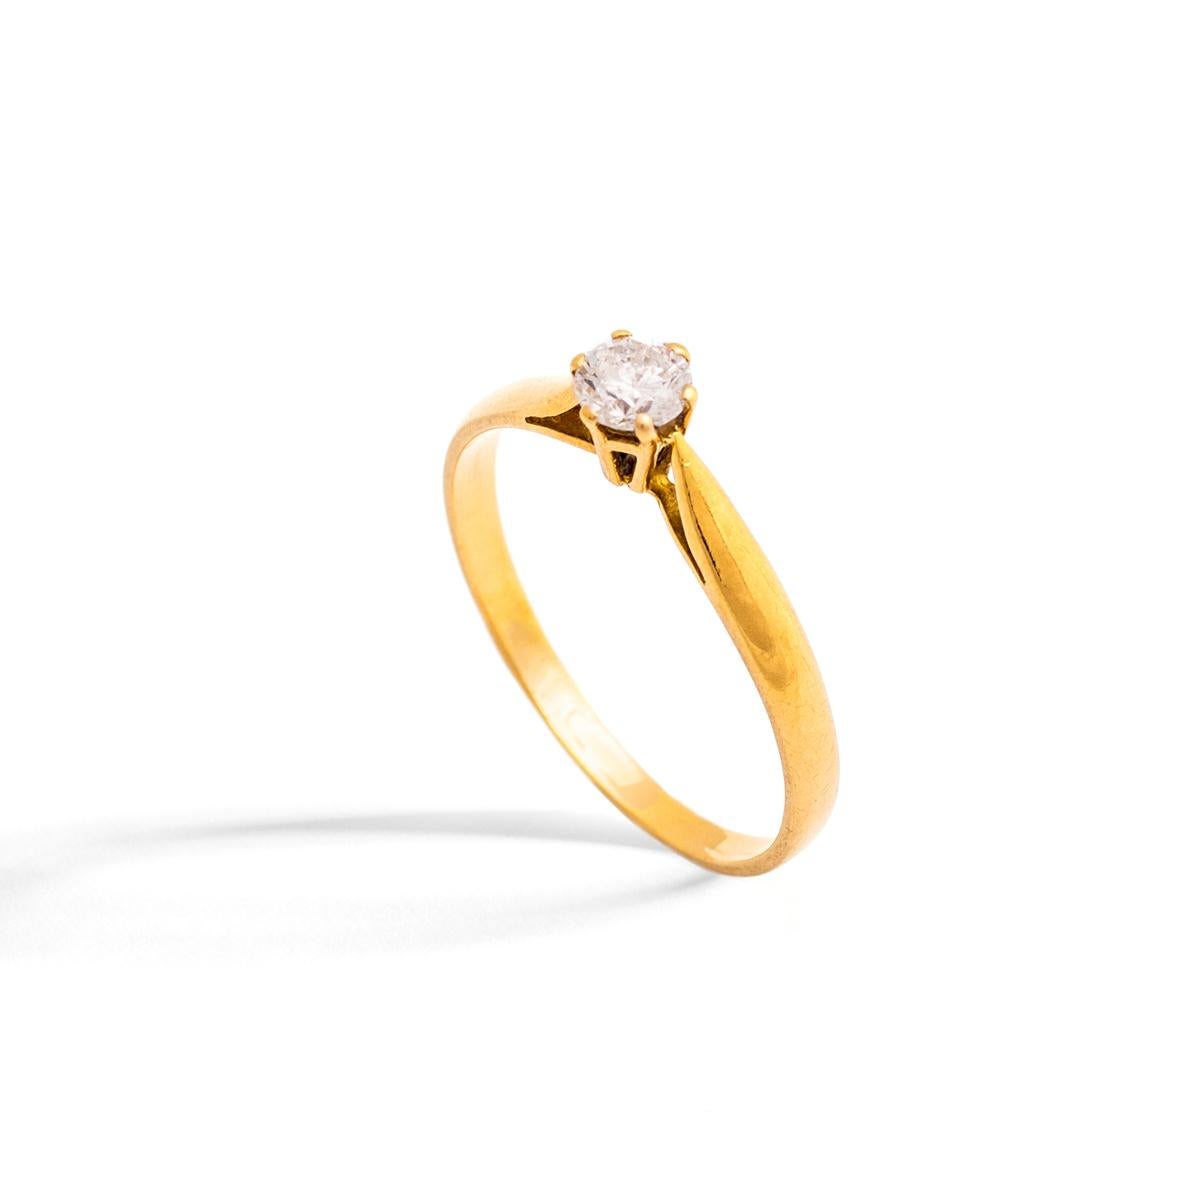 Solitaire Diamond round cut on yellow gold Ring.
Modern cut. Estimated to be H-I color and Vs color.